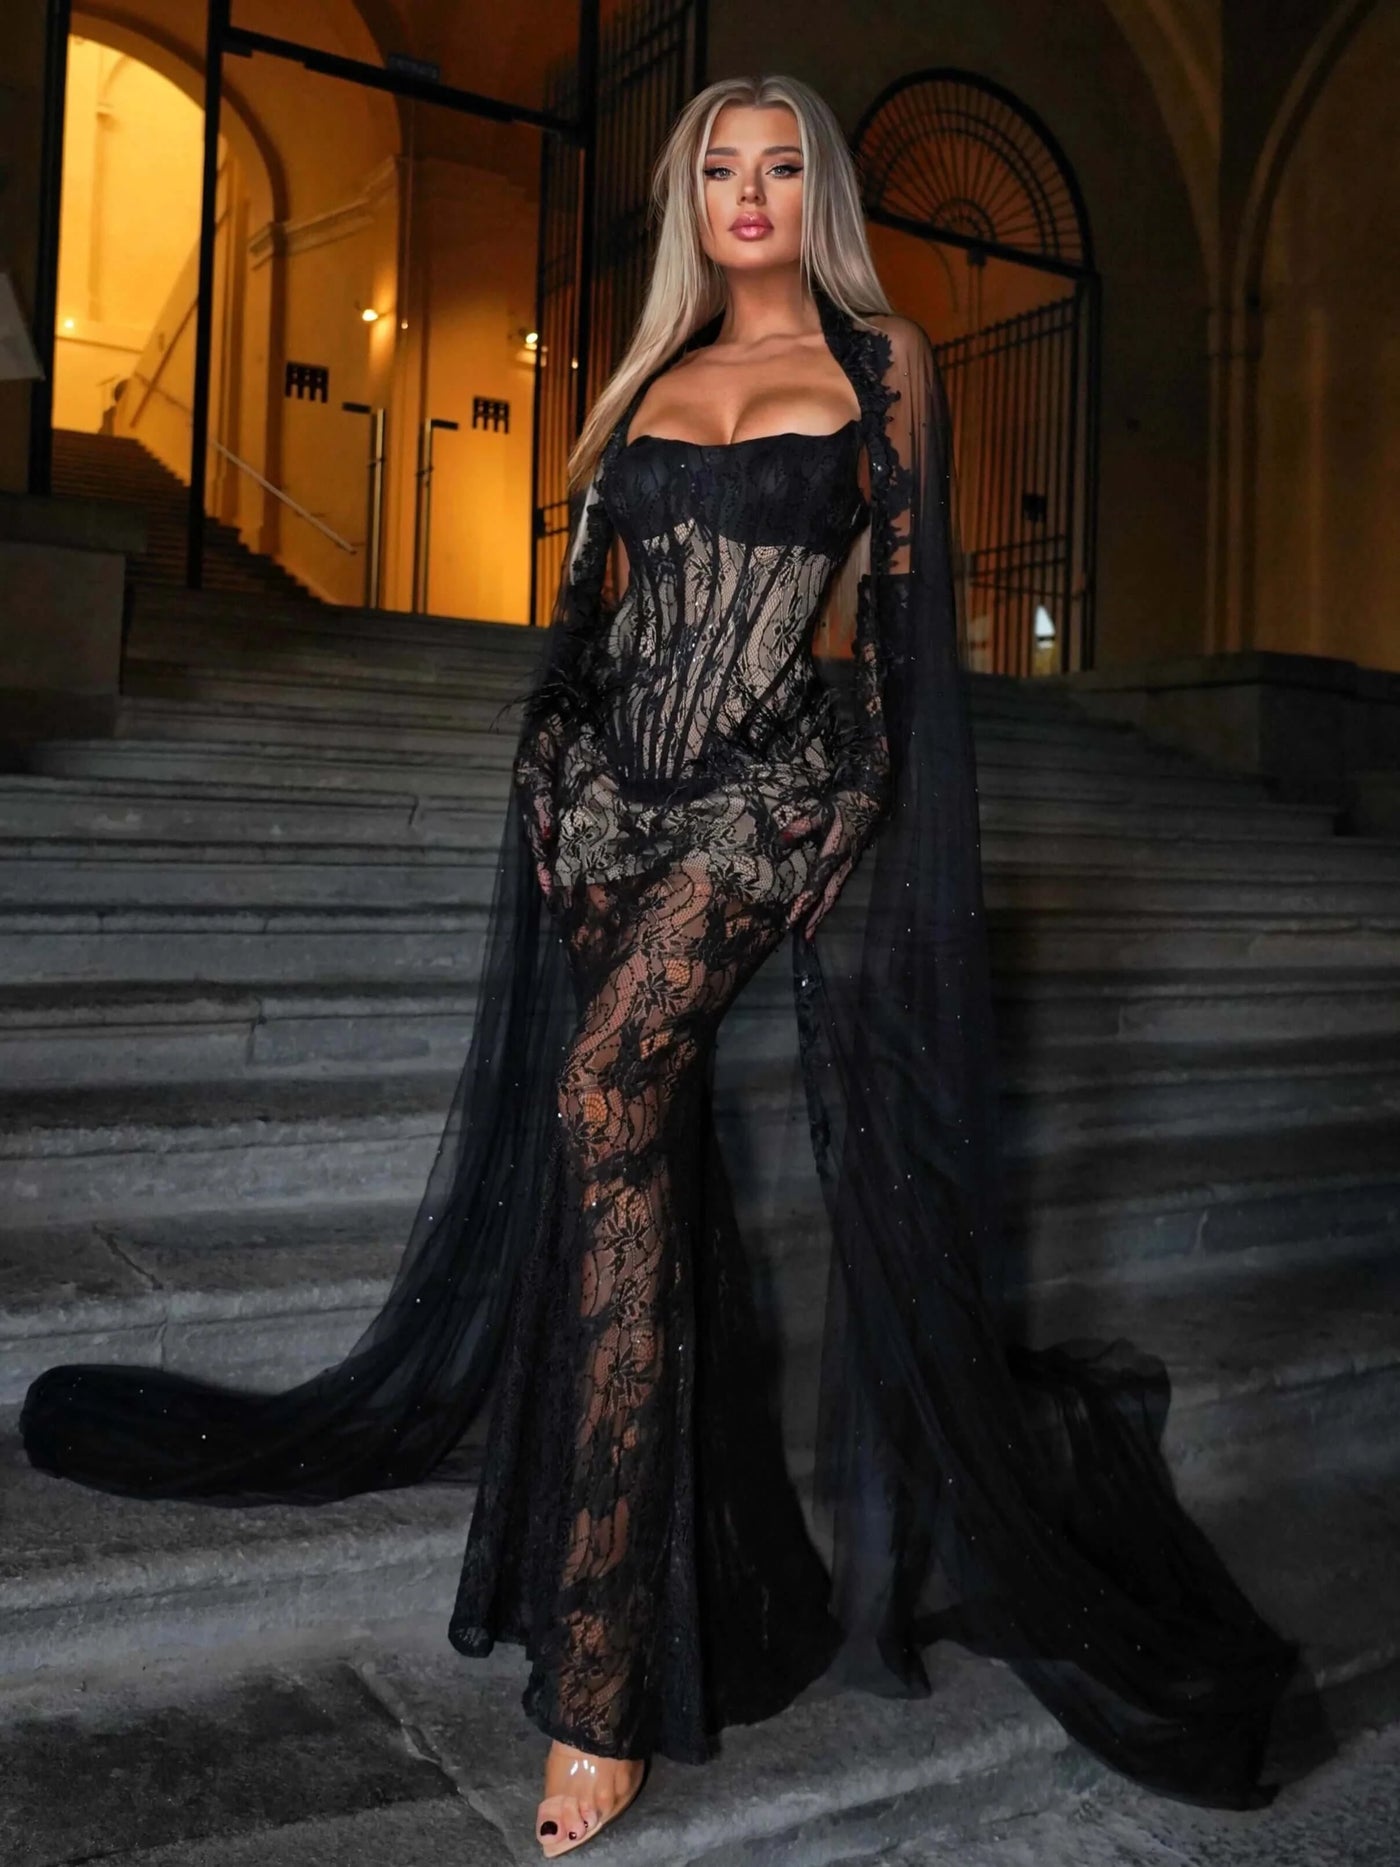 Strapless Corset Style Black Lace Gown